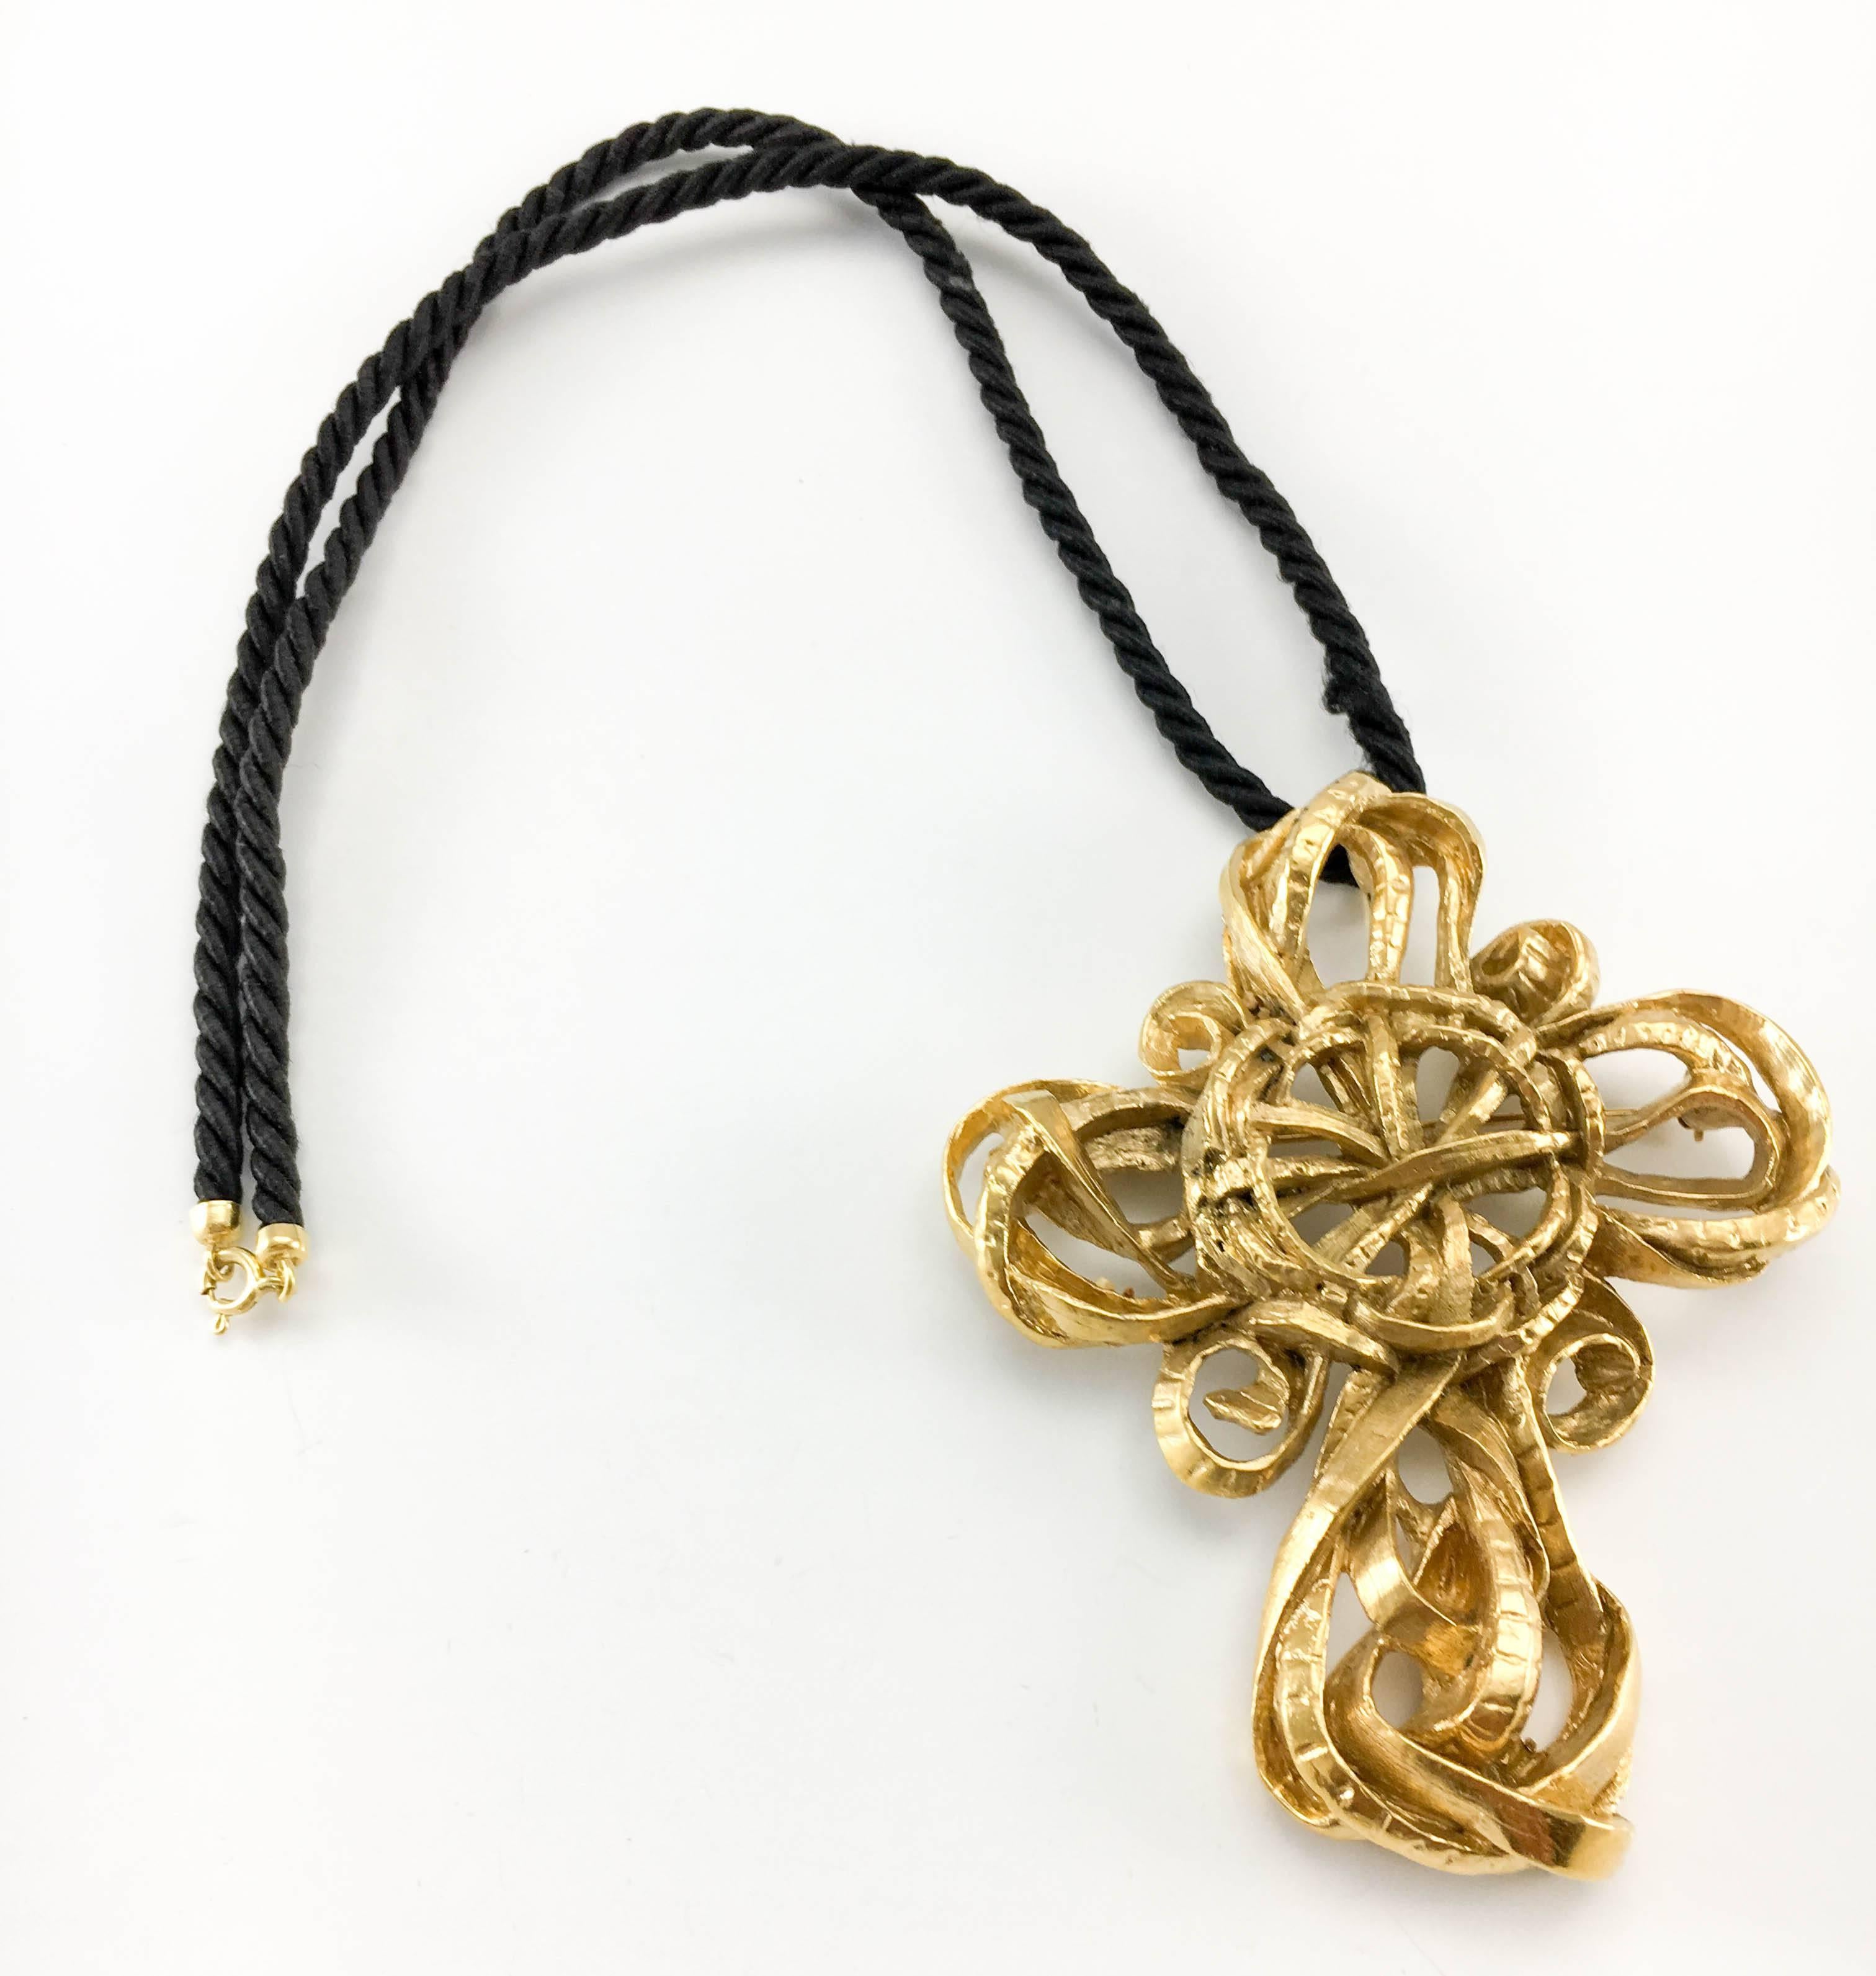 Vintage Lacroix Gold-Plated Cross Pendant / Brooch. This very stylish piece by Christian Lacroix dates back from the 1980’s. Made in gold-plated metal, the design is elaborate and flamboyant, along the lines of Lacroix’s aesthetics. Versatile, it